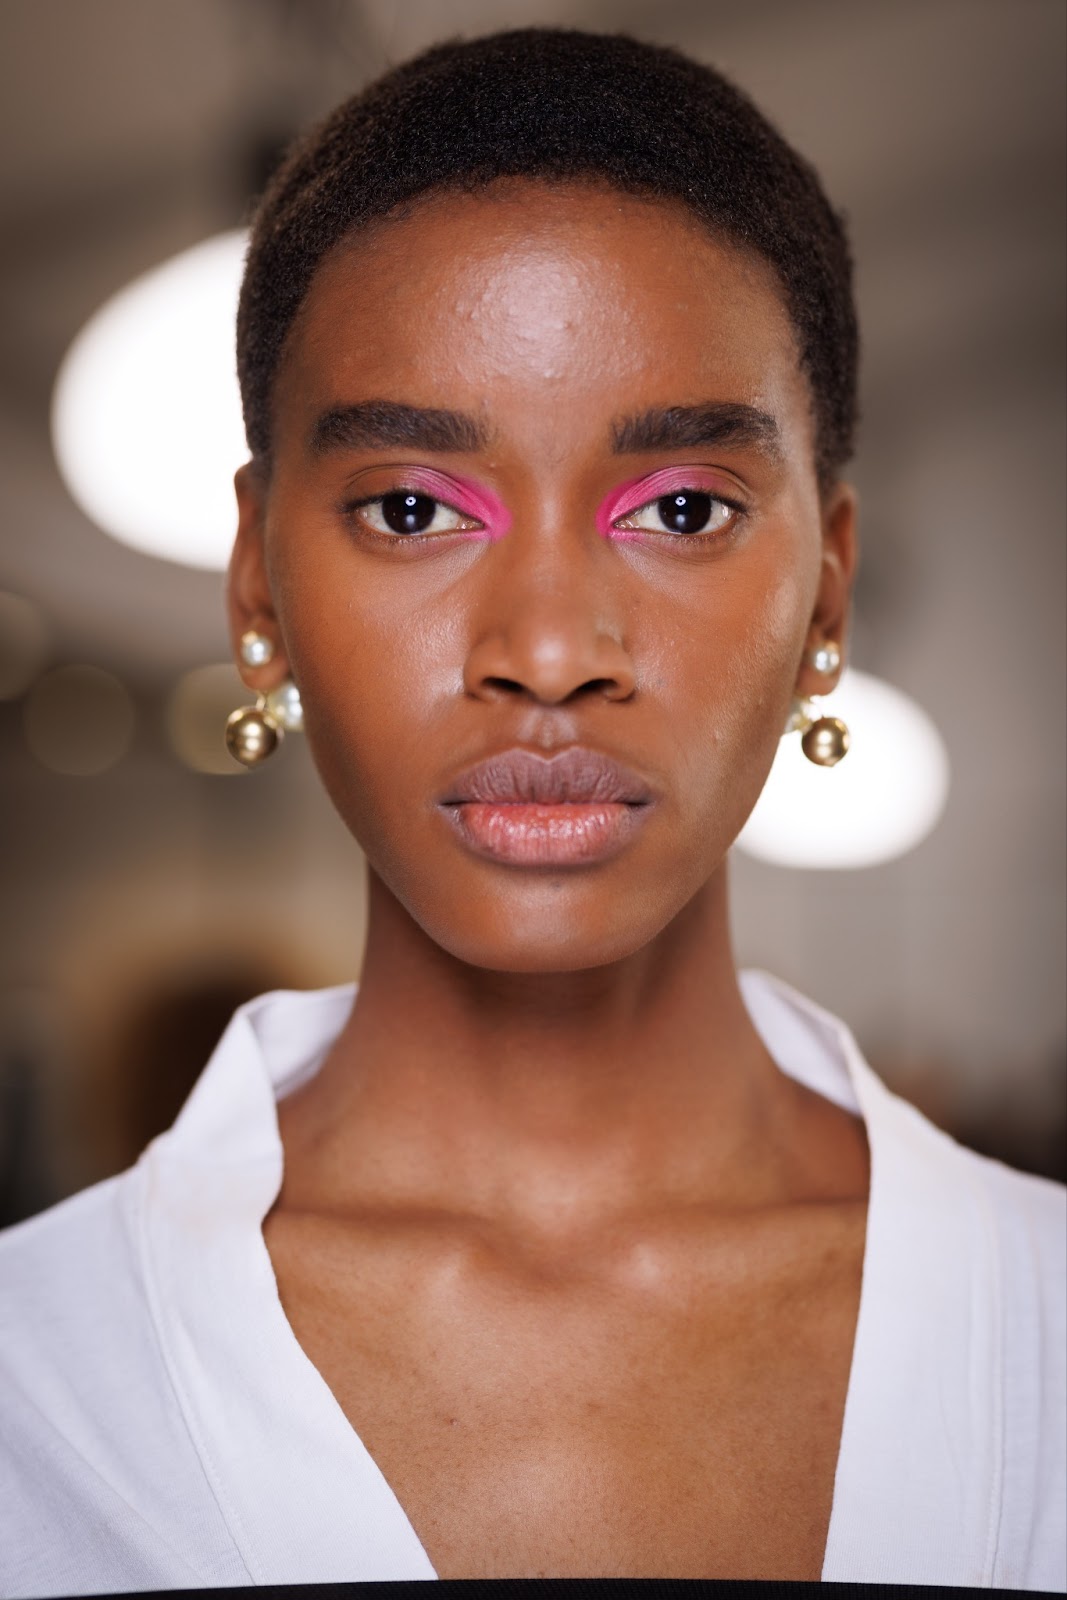 Makeup at the Christian Dior Fall 2024 show in Paris Image by Filippo Fortis